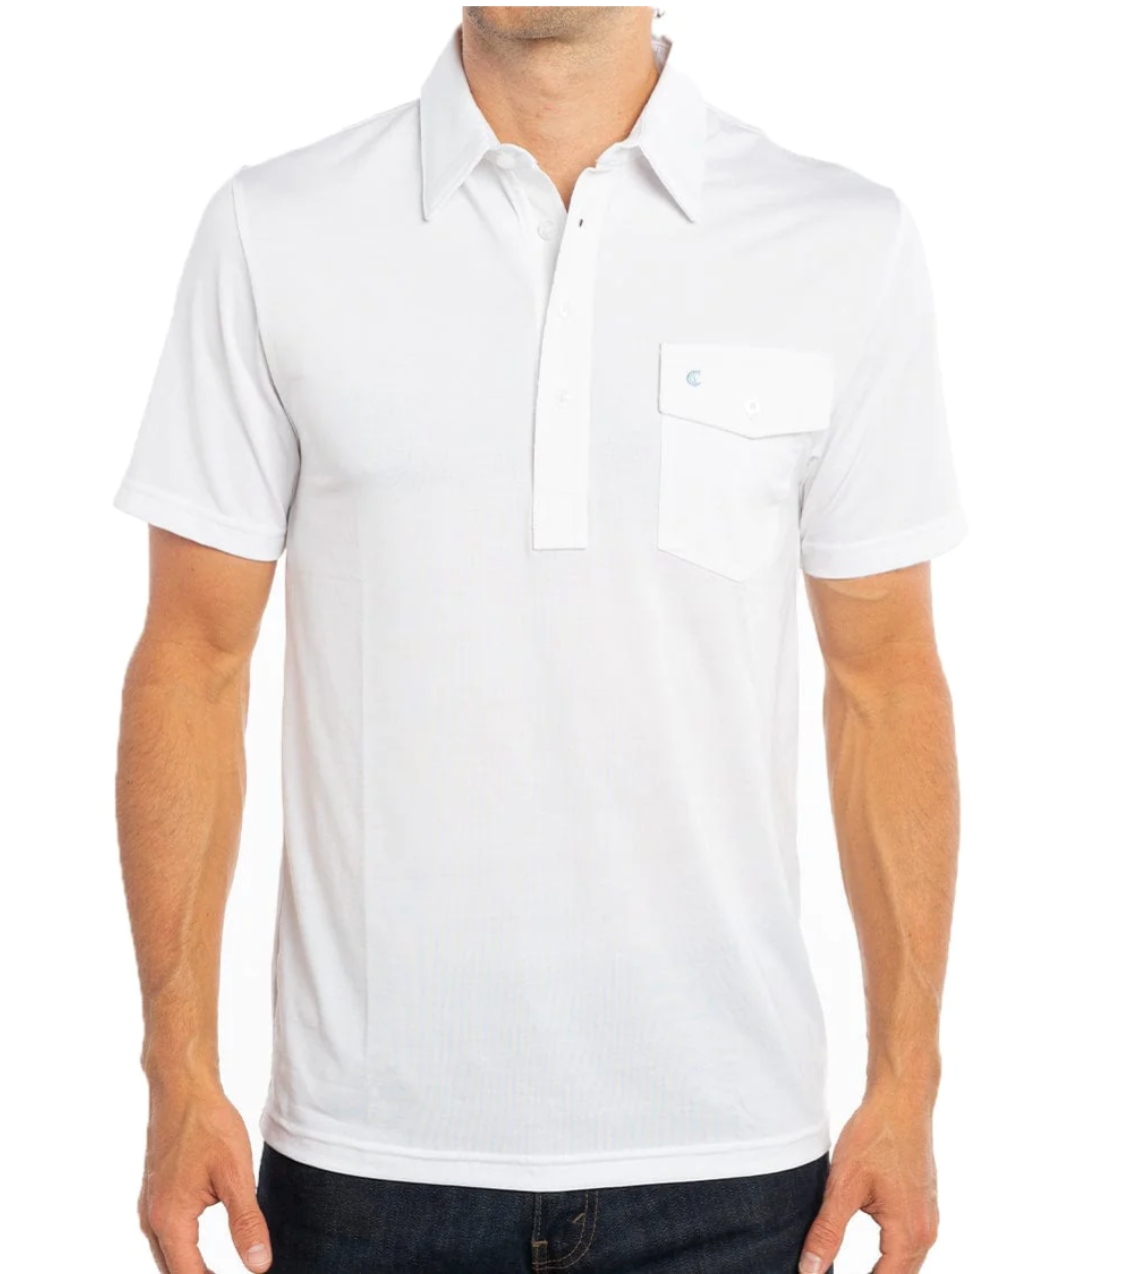 Criquet Performance Jersey Players Shirt - Bright White